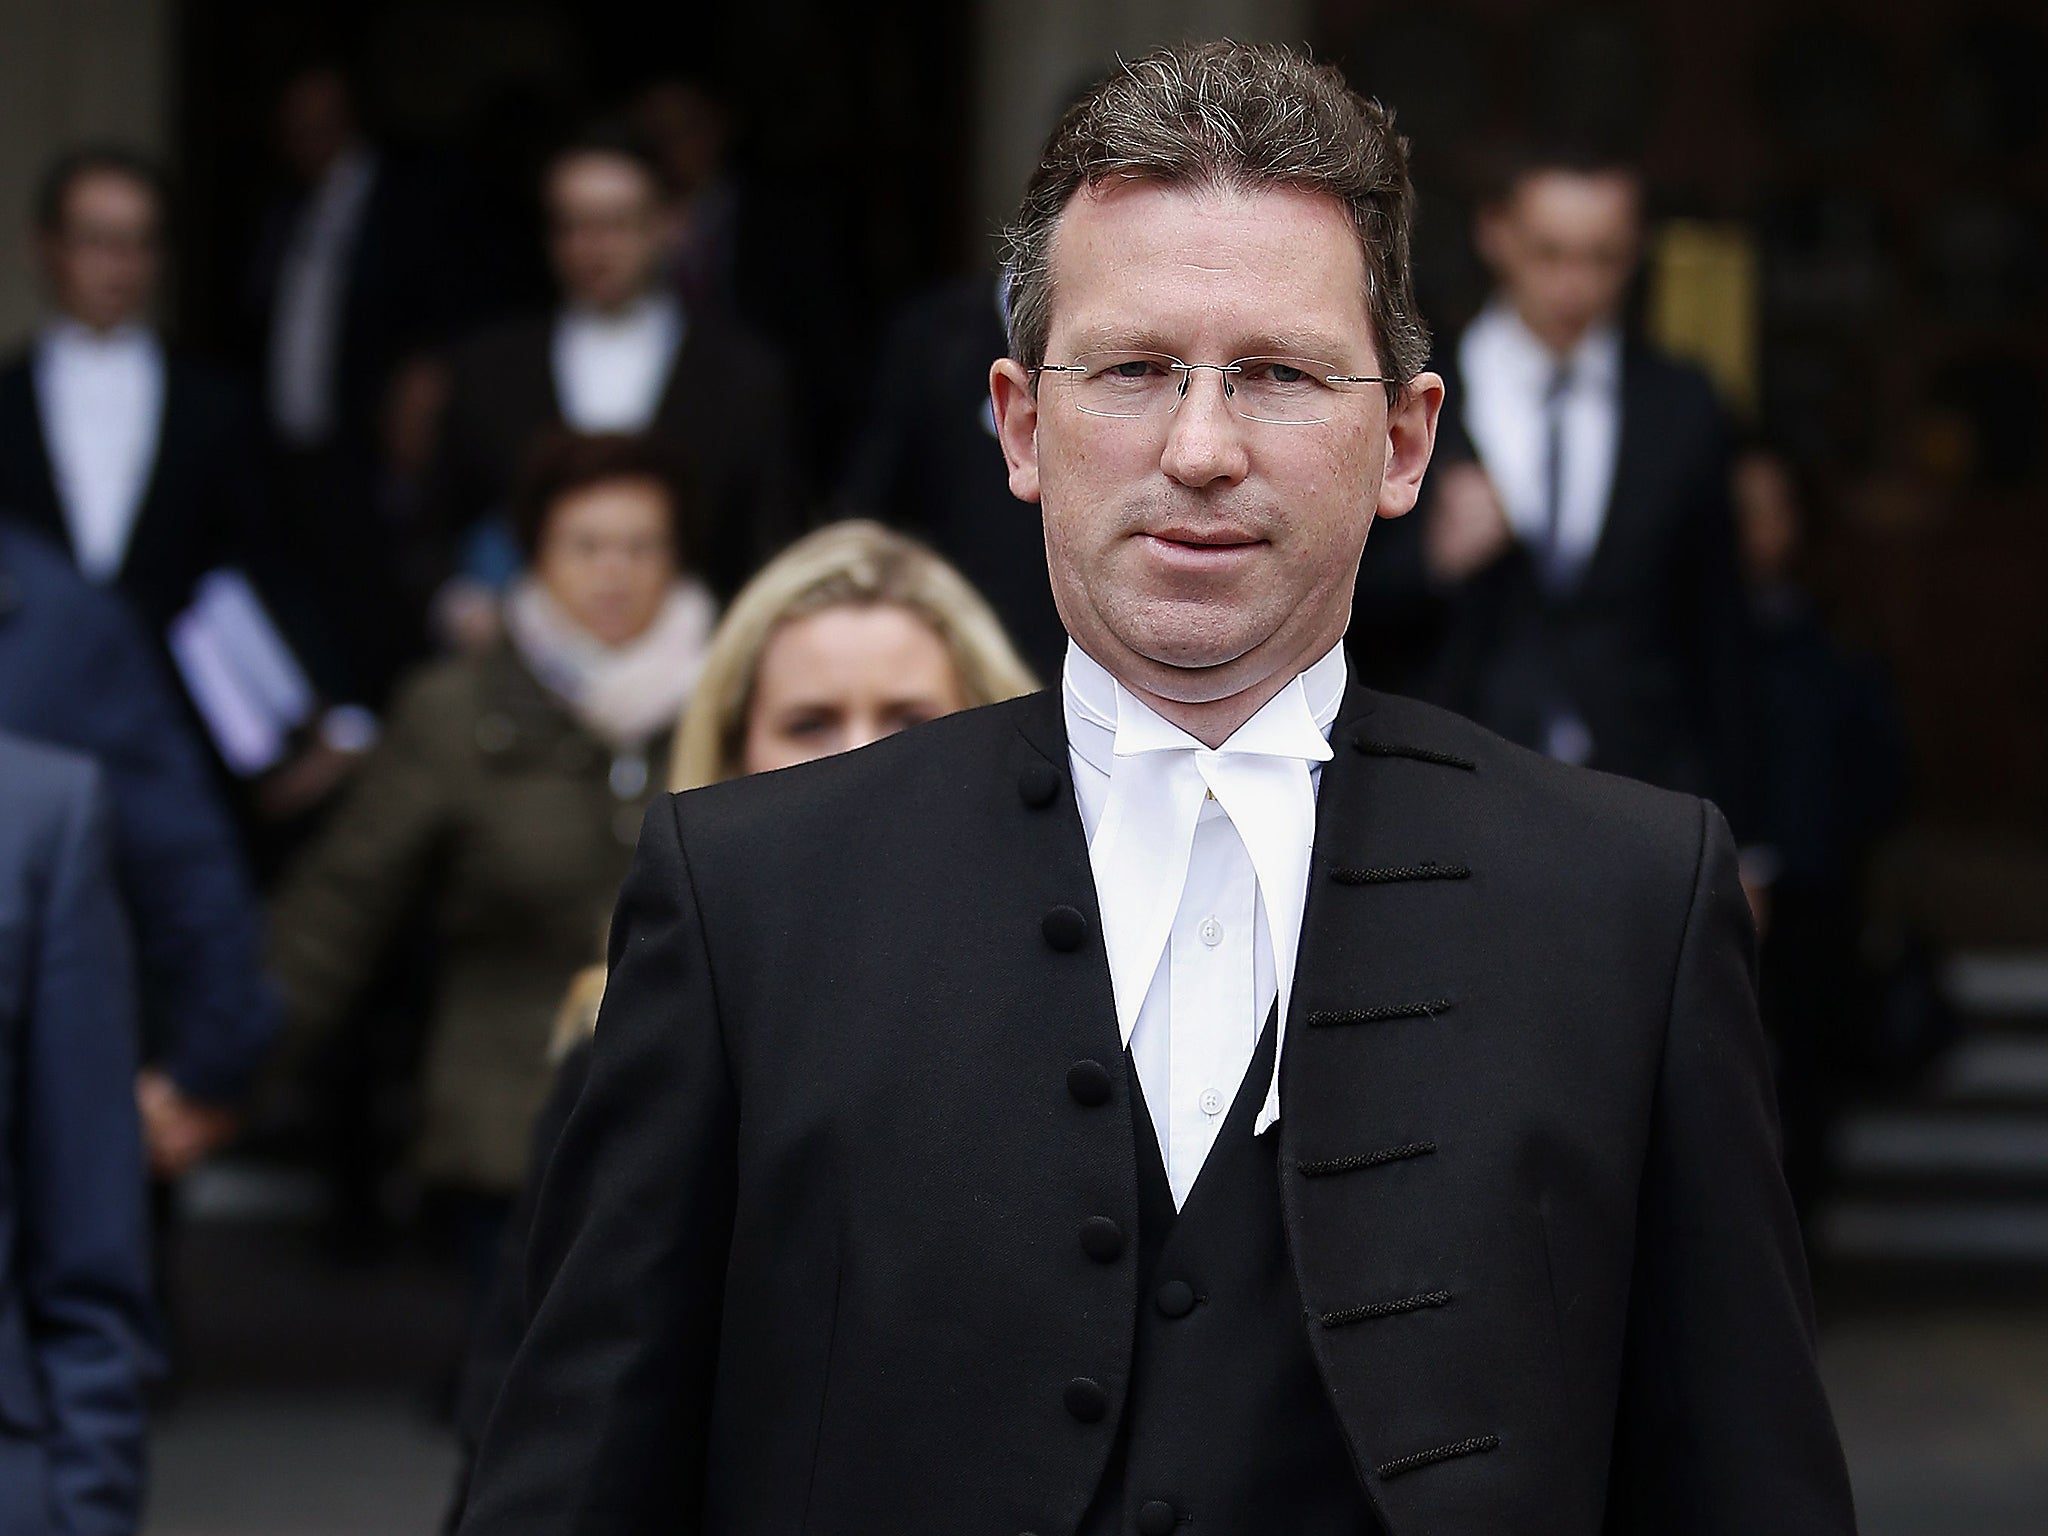 Britain's Attorney General Jeremy Wright leaves the Royal Courts of Justice